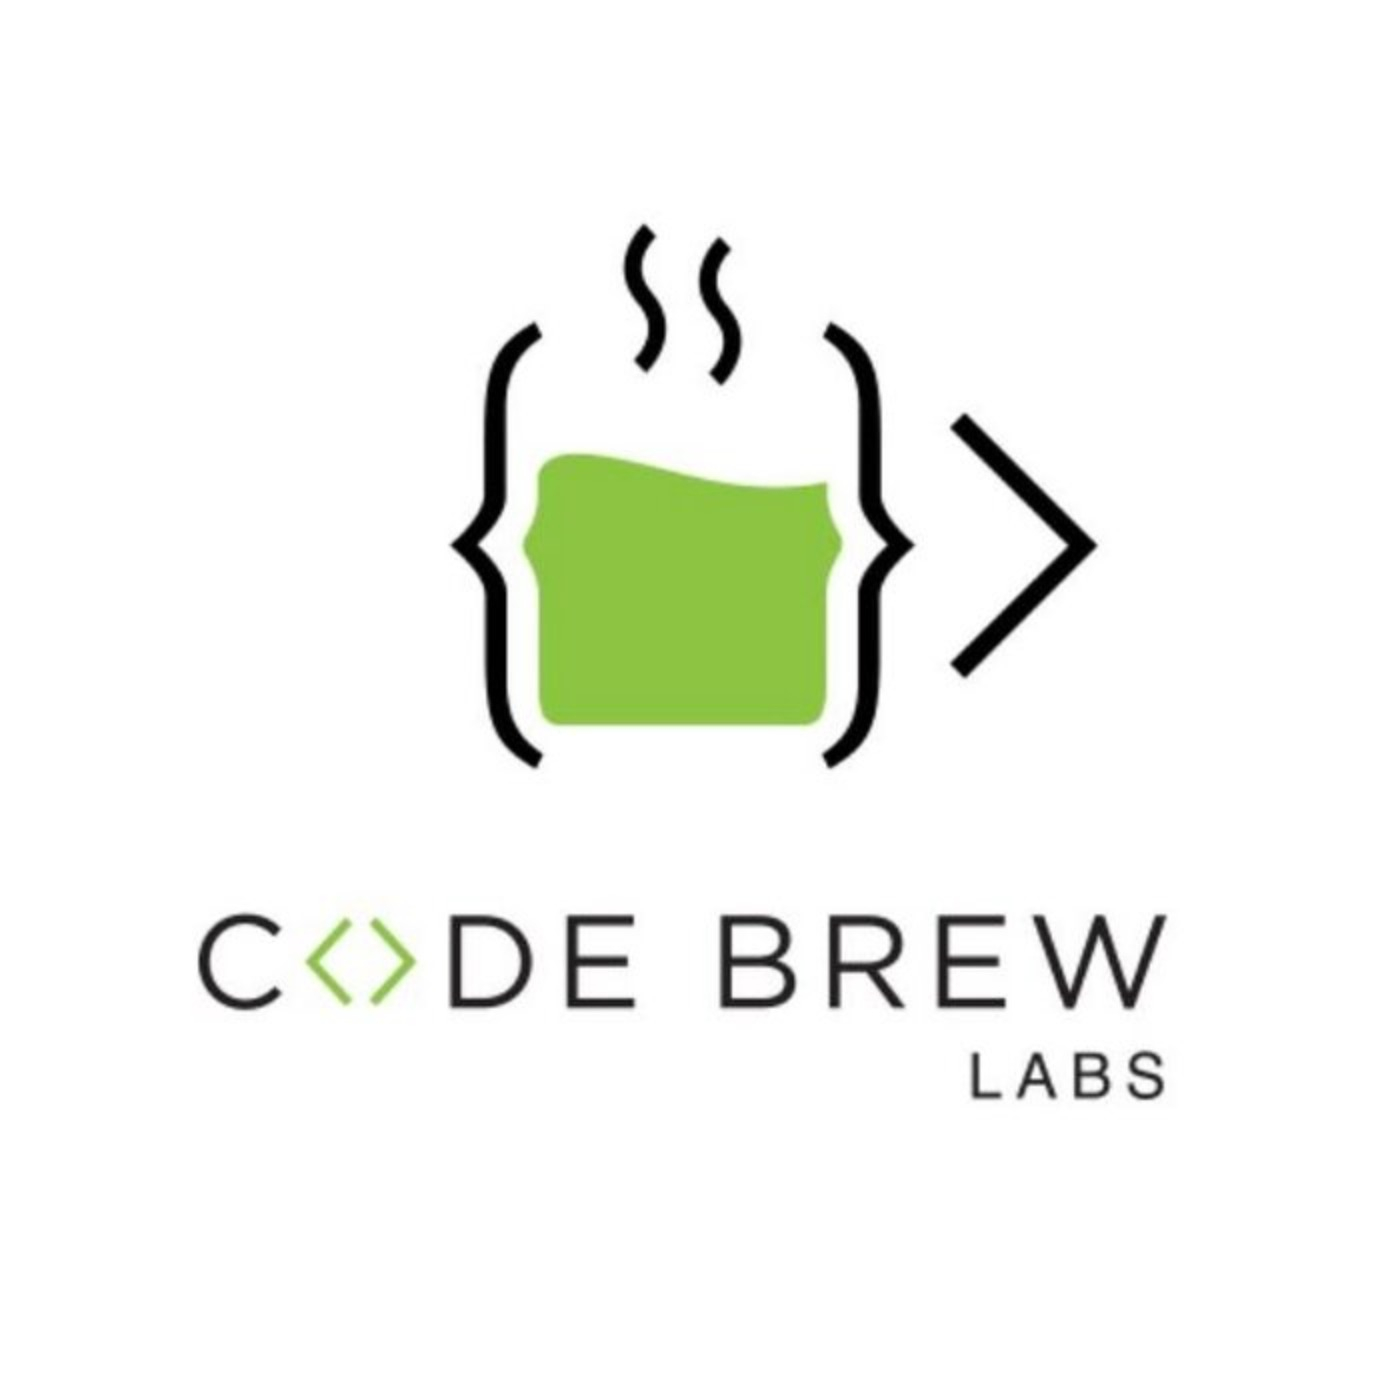 Get Delivery App Development Services At Affordable Range | Code Brew Labs